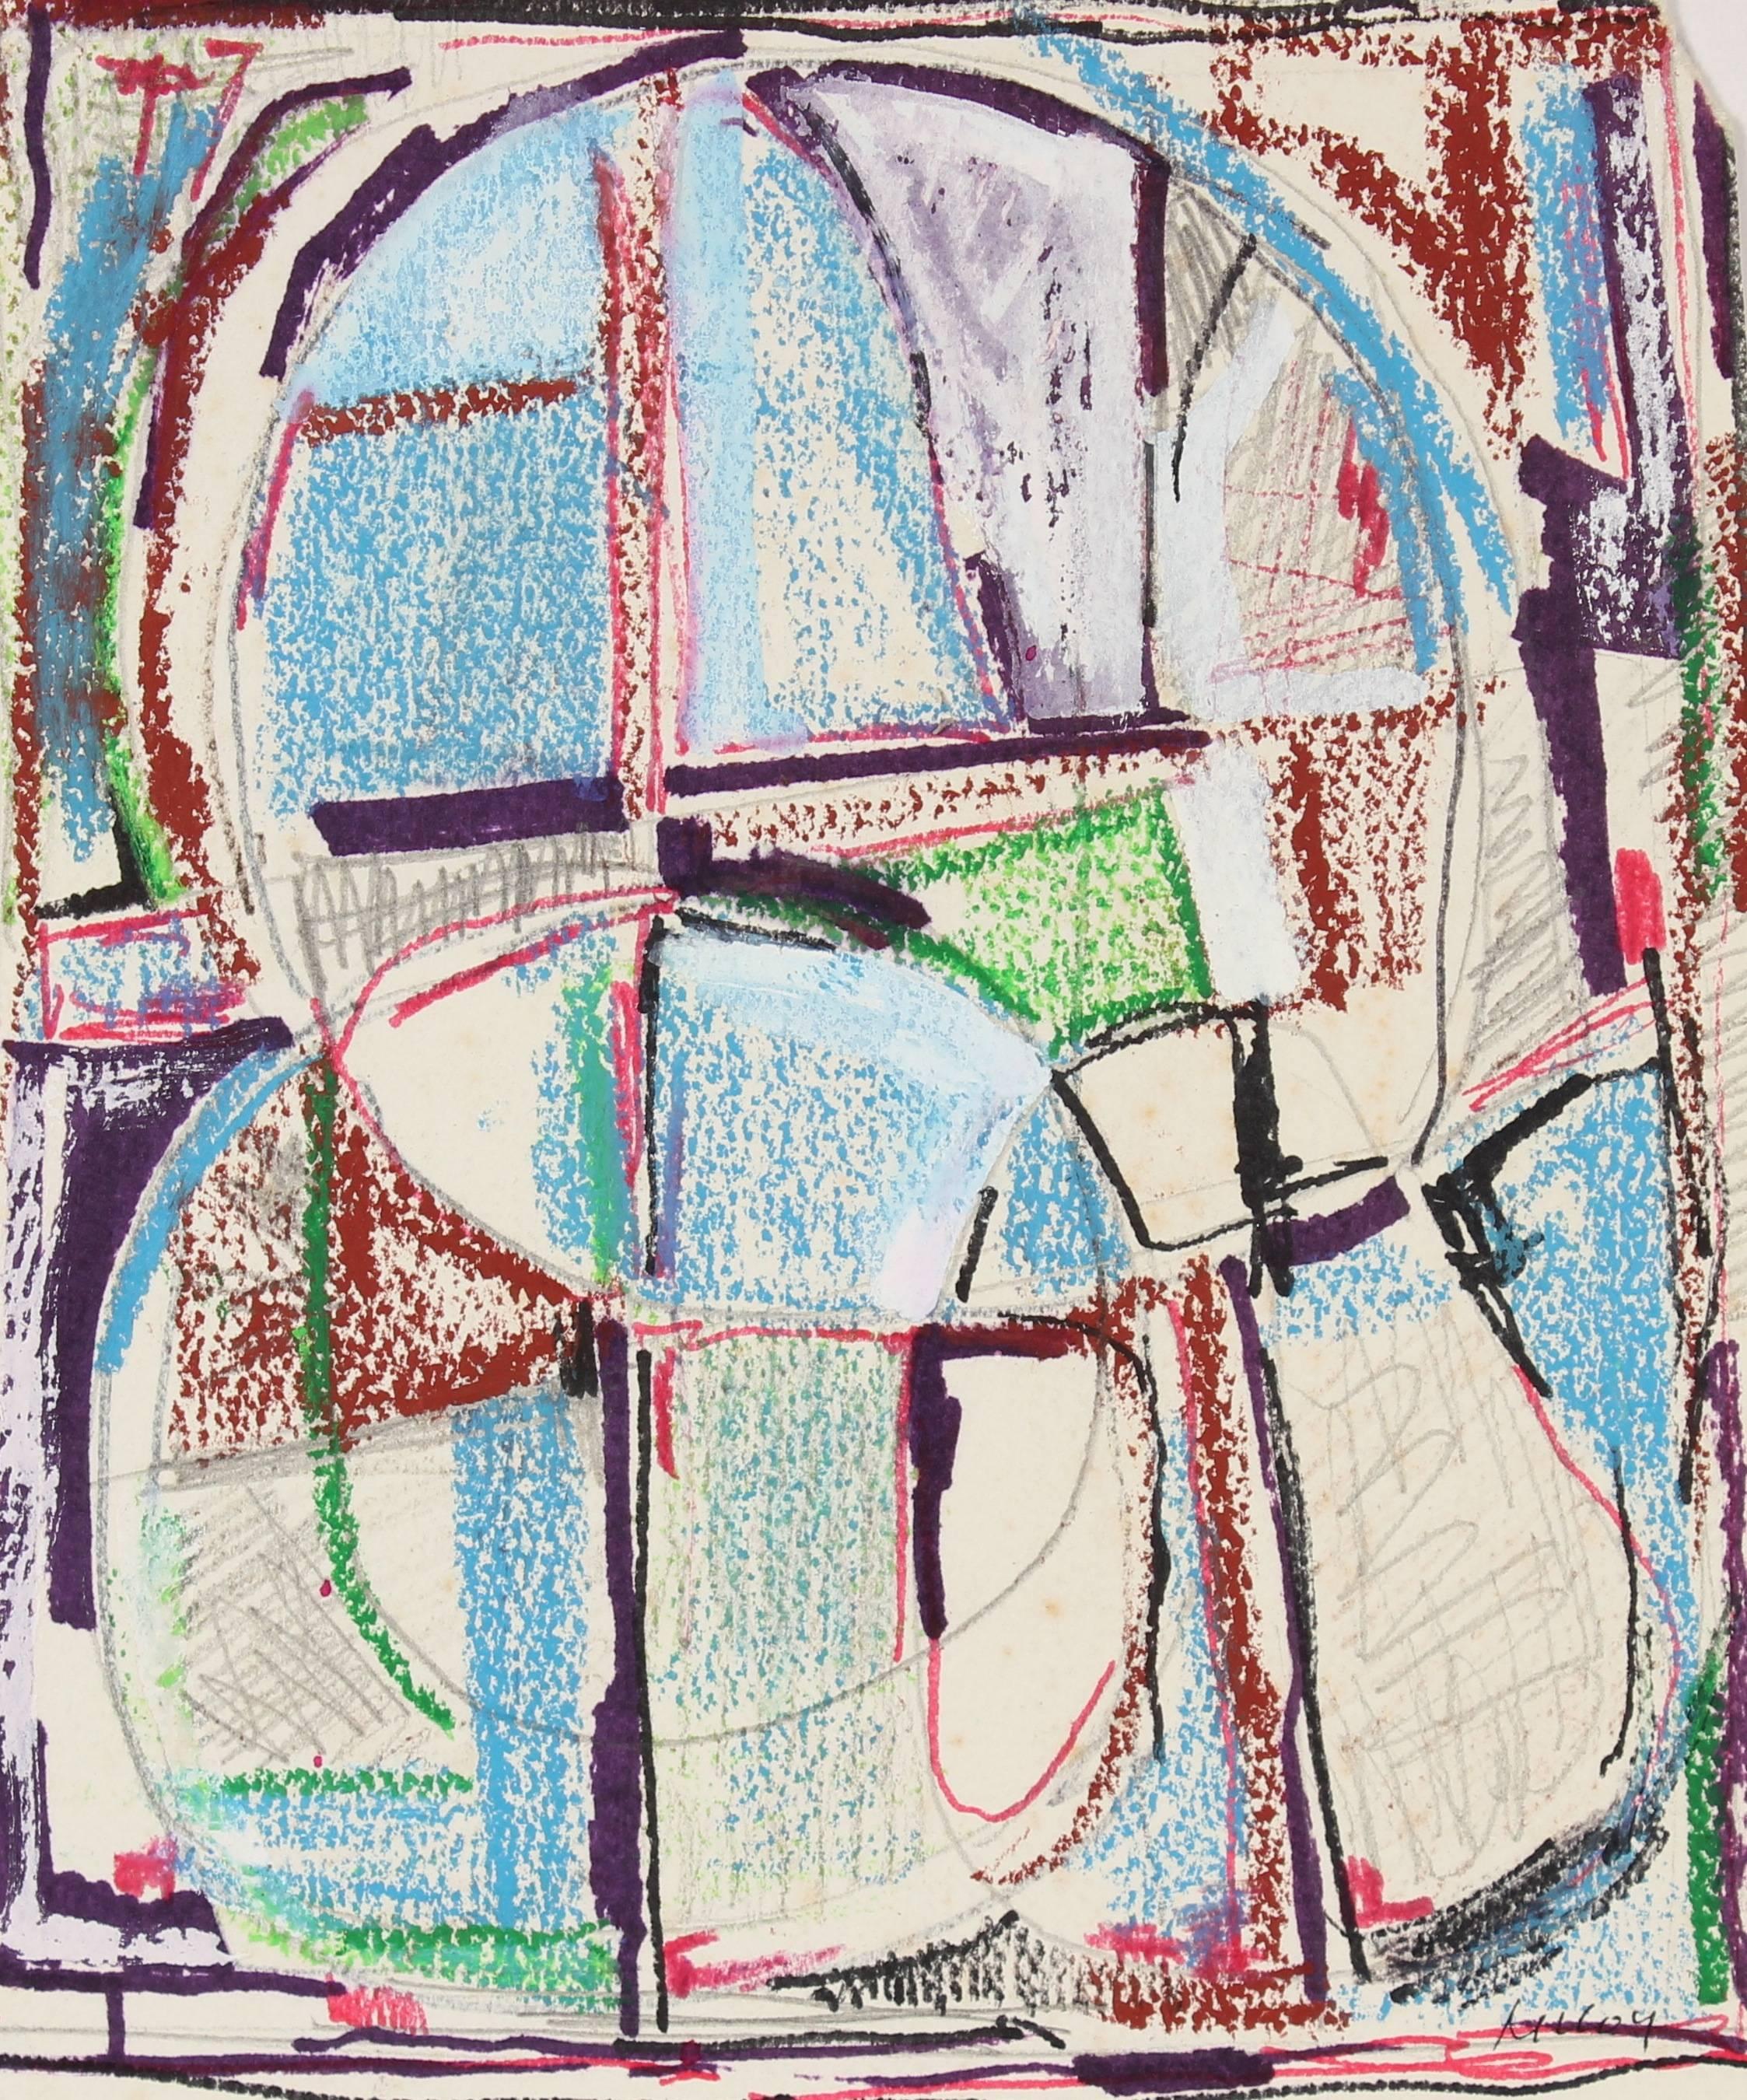 Paul McCoy Abstract Drawing - Modernist Colorful Abstract in Ink and Pastel with Red & Blue, Mid 20th Century